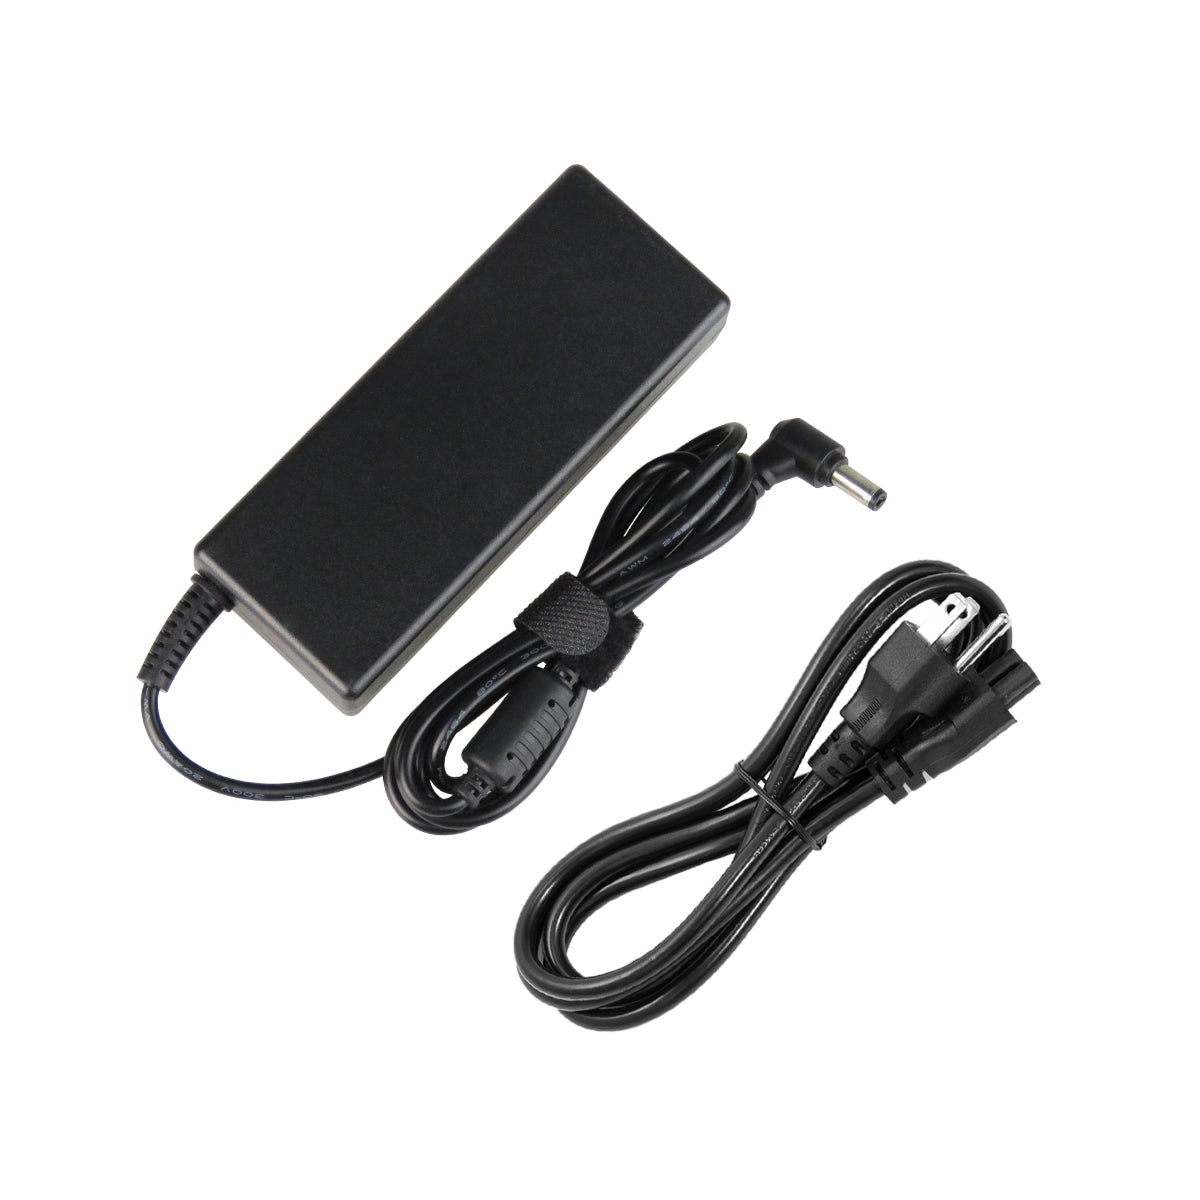 AC Adapter Charger for ASUS X58C Notebook.